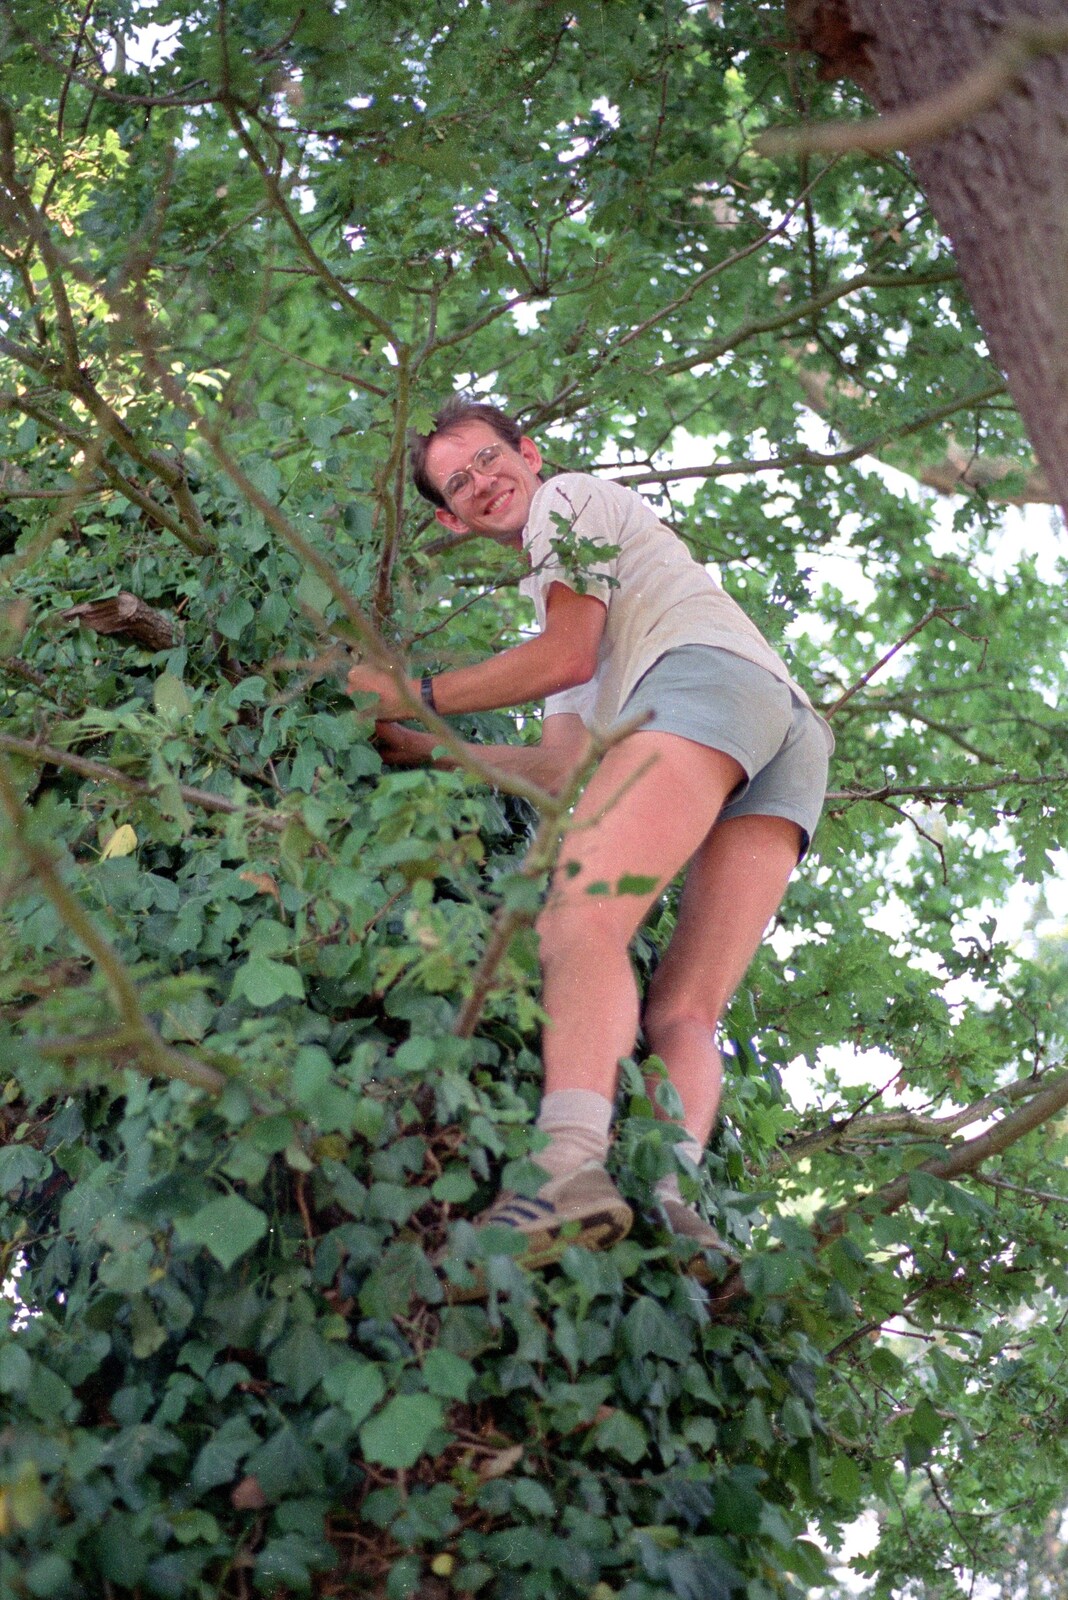 Phil climbs a tree from Back From Uni: Summer Pruning, Bransgore, Dorset - 25th July 1989